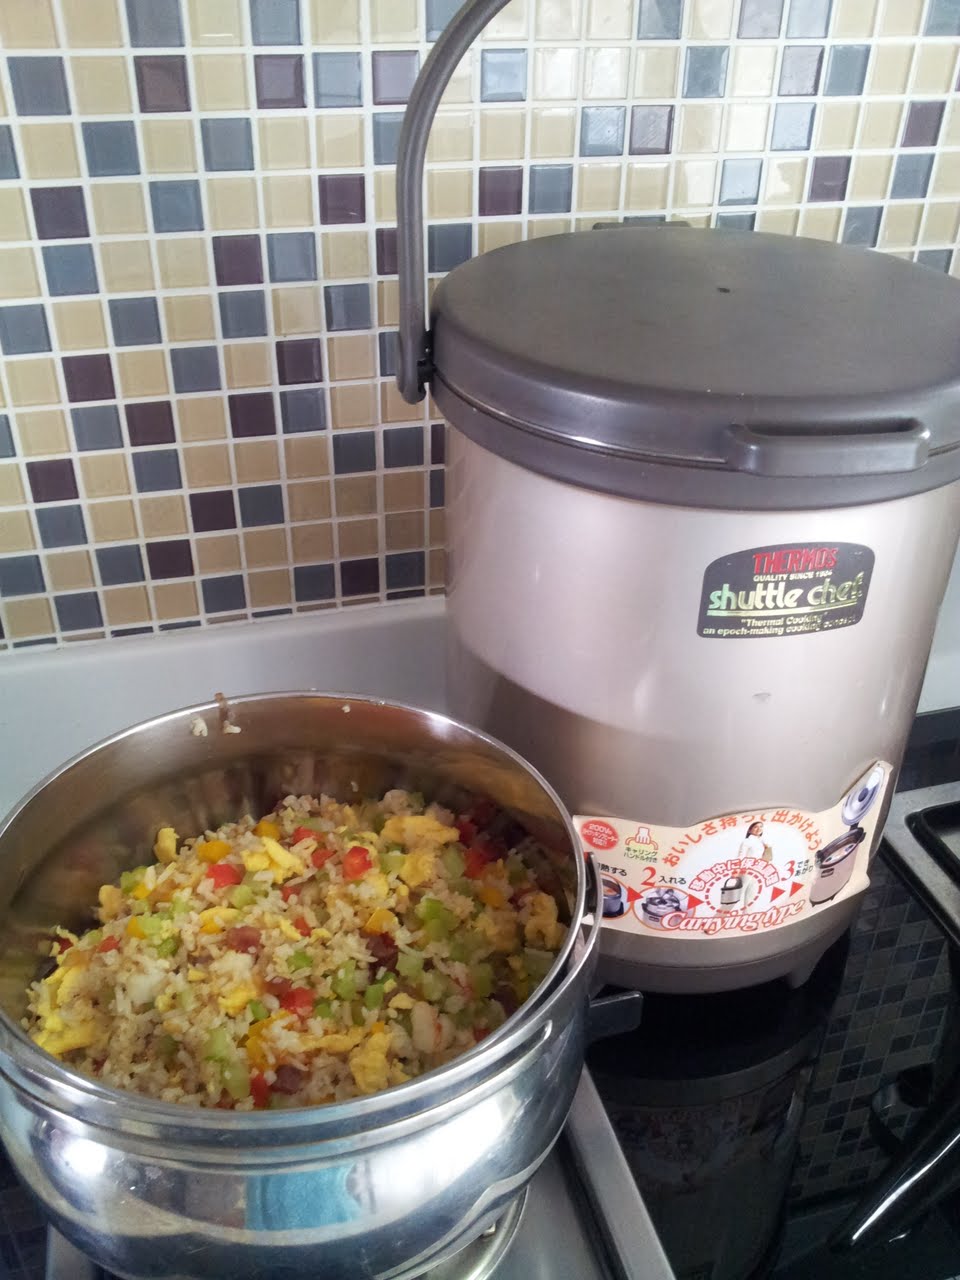 https://www.healthfreakmommy.com/wp-content/uploads/2013/08/fried-rice-in-thermos-shuttle-chef-20-aug.jpg